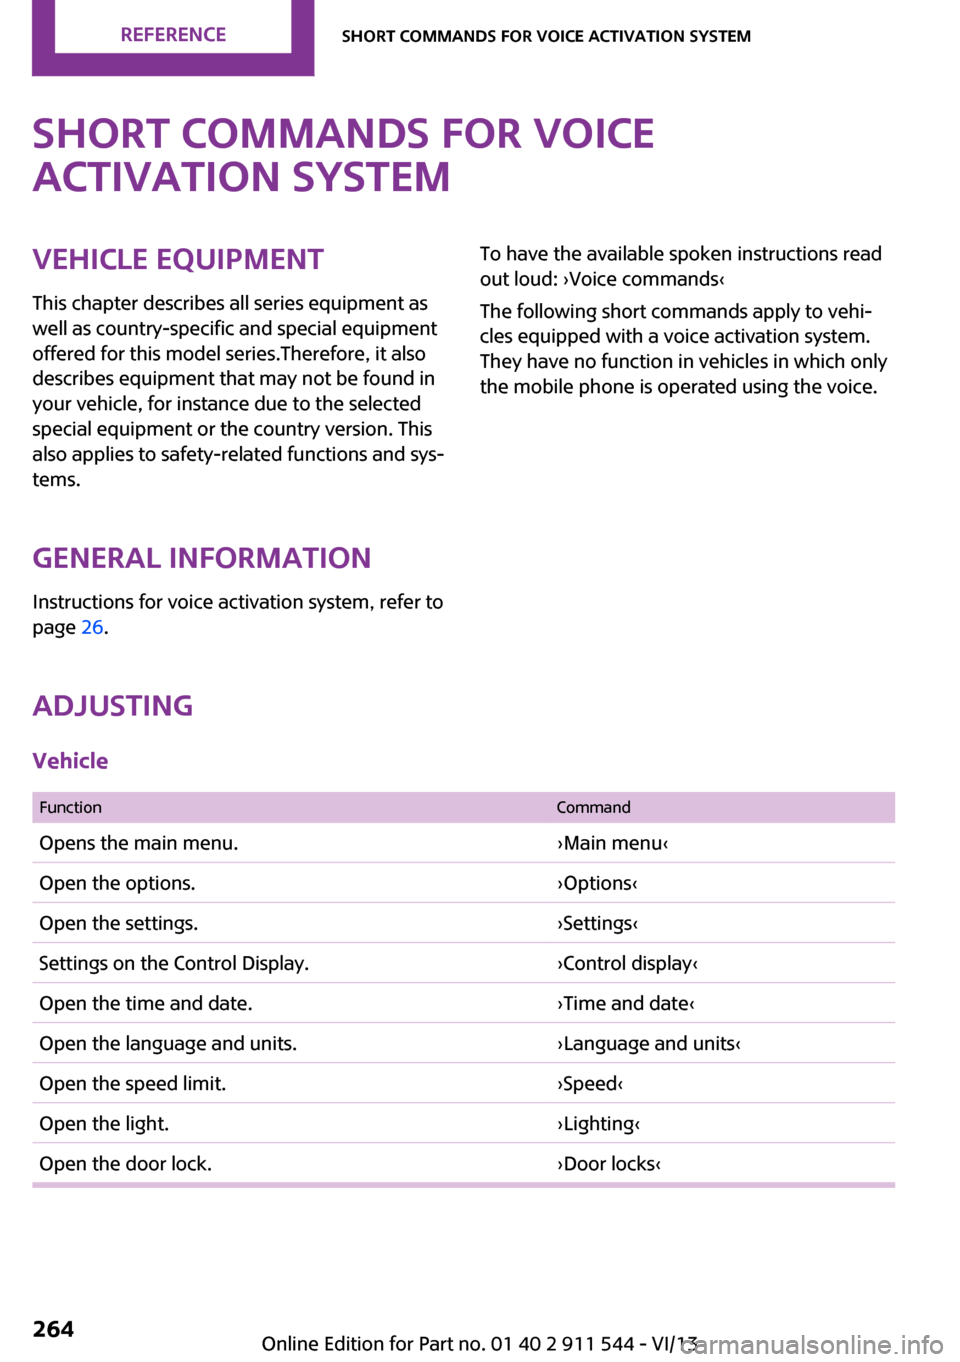 MINI Paceman 2014  Owners Manual (Mini Connected) Short commands for voice
activation systemVehicle equipment
This chapter describes all series equipment as
well as country-specific and special equipment
offered for this model series.Therefore, it al